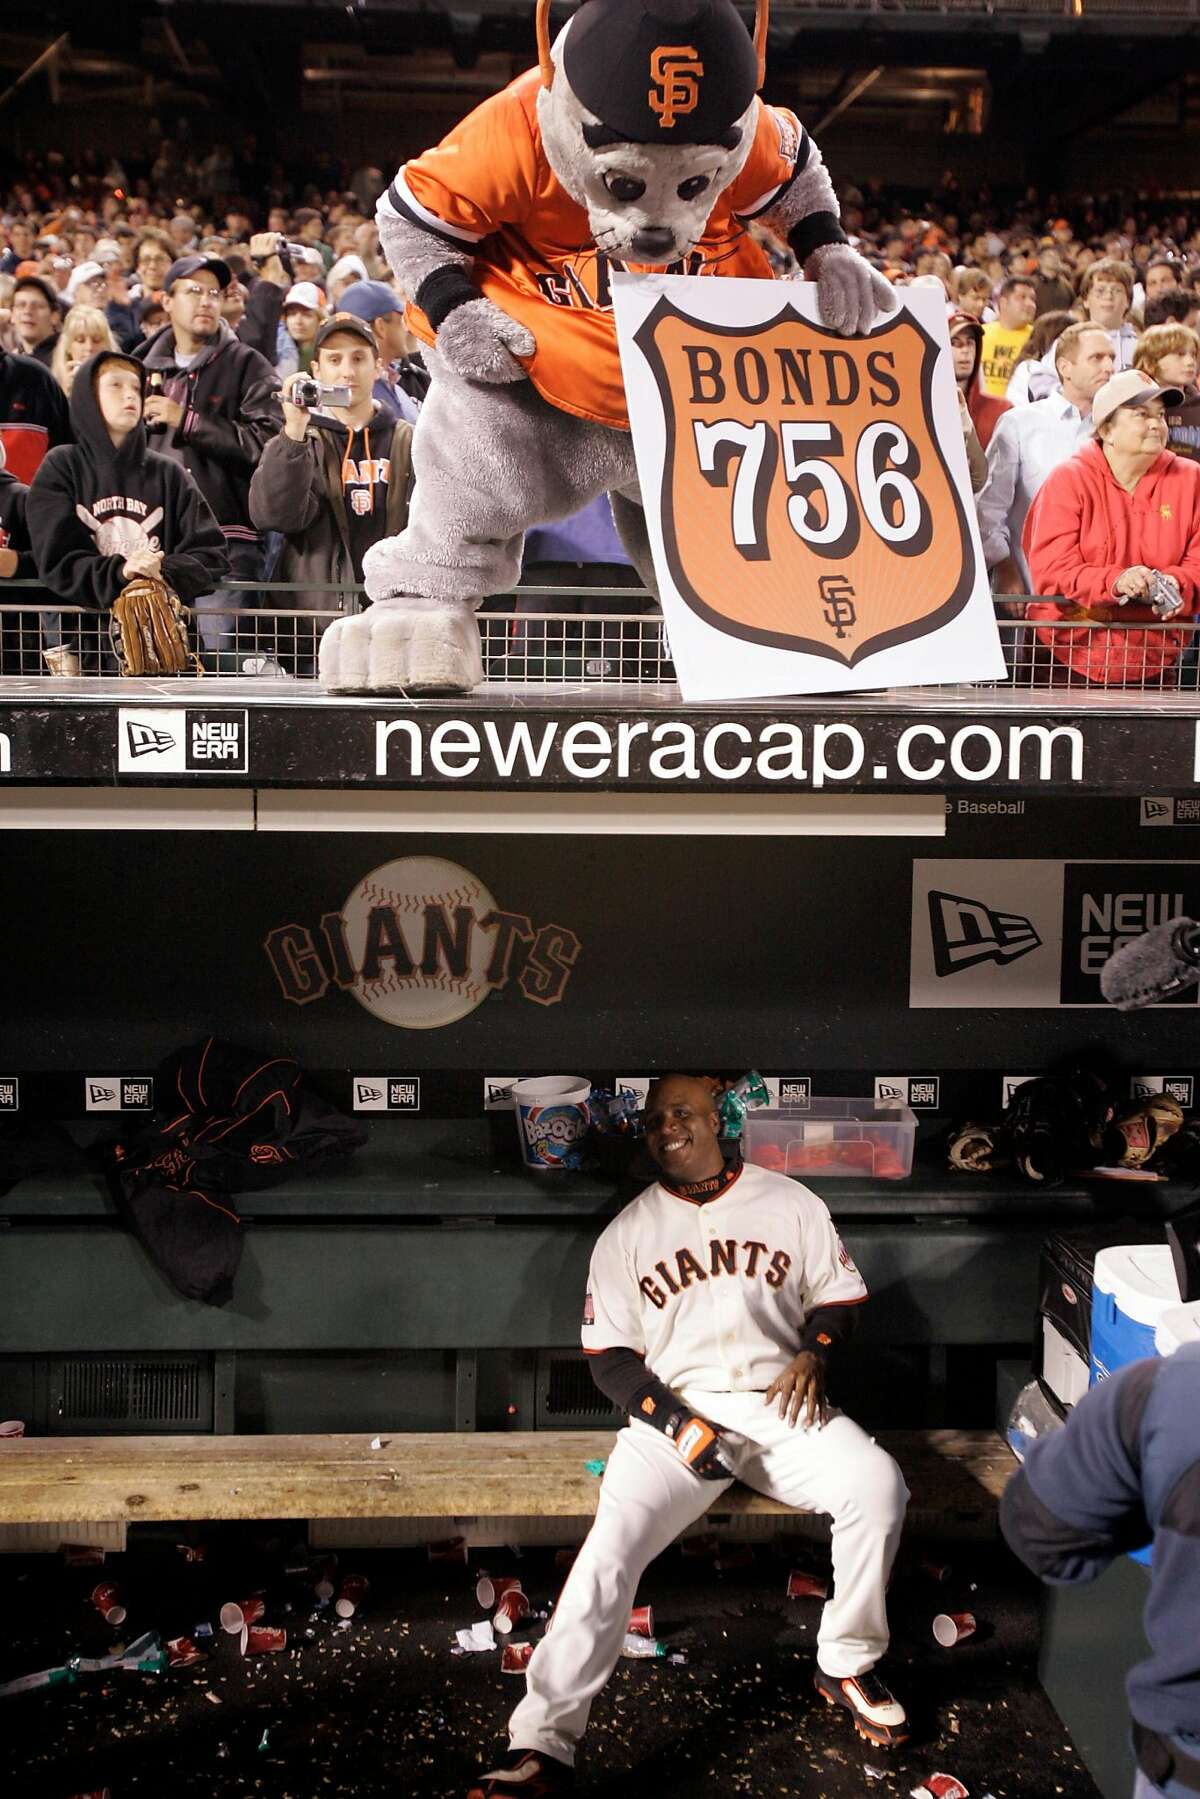 GIANTS07_df_008.JPG Lou Seal looks into the dugout after Barry Bonds hits home run number 756 in the bottom of the fifth inning. Washington Nationals play the San Francisco Giants at AT&T Park in San Francisco, CA, on Tuesday, August 07, 2007. Deanne Fitzmaurice / The Chronicle ** (cq) Ran on: 08-09-2007 Historic swing: Barry Bonds follows through on the swing that sent his 756th home run soaring 435 feet into the center-field bleachers. On contact, there was no question the ball would reach the stands. Bonds knew it and stayed in the batters box, raising both arms as he took his place atop the all-time home run list.